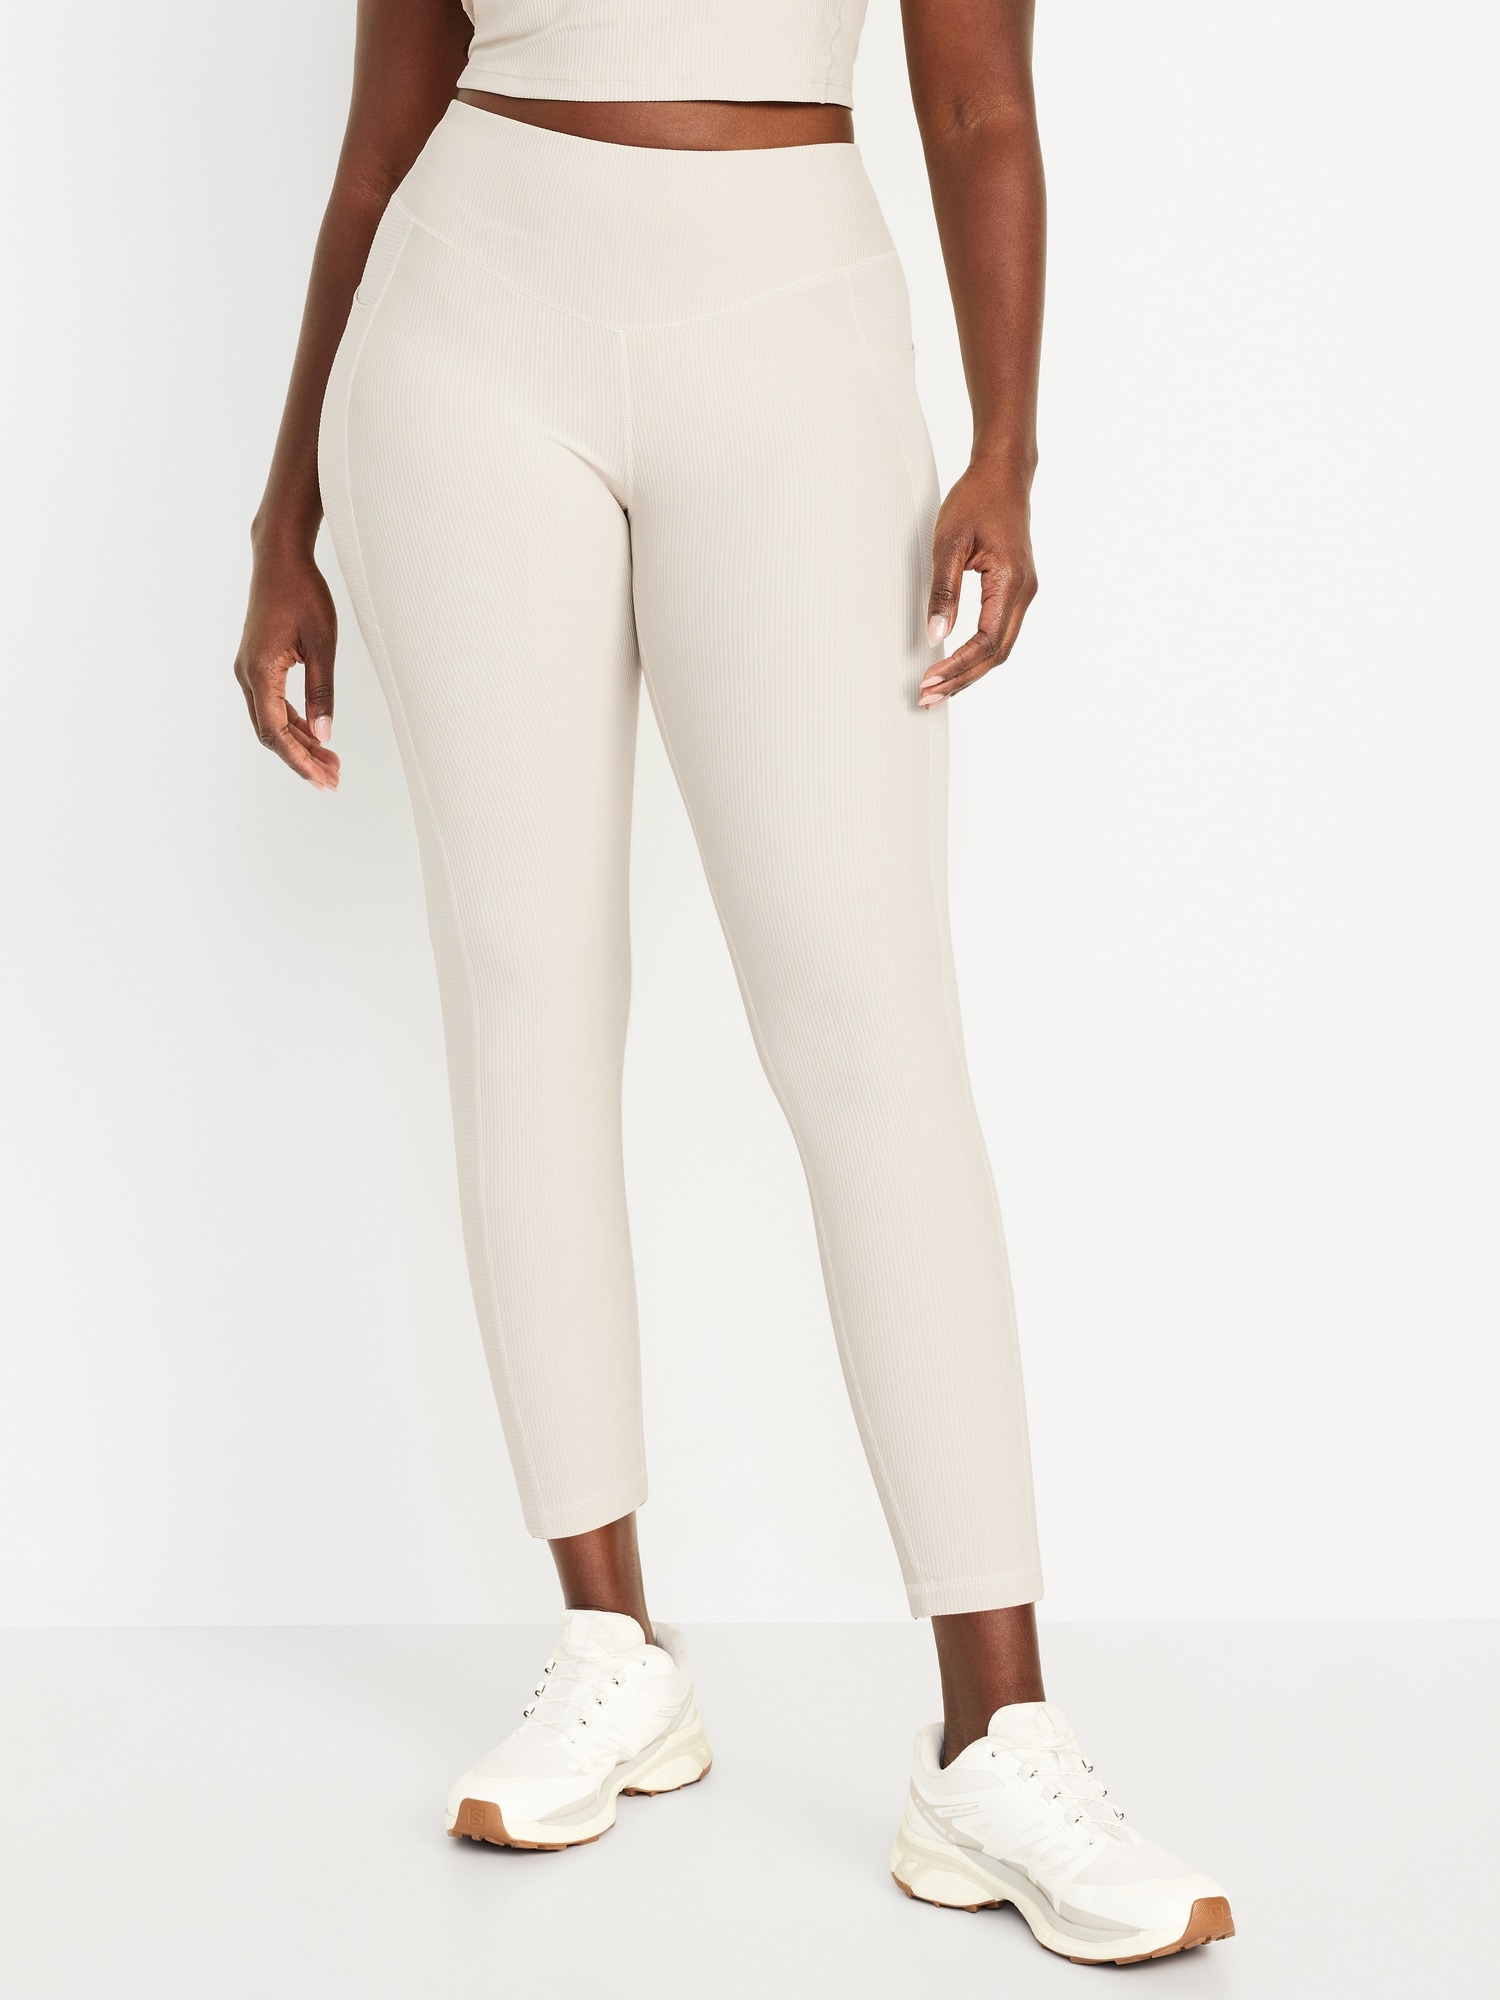 High-Waisted PowerSoft Ribbed 7/8 Leggings